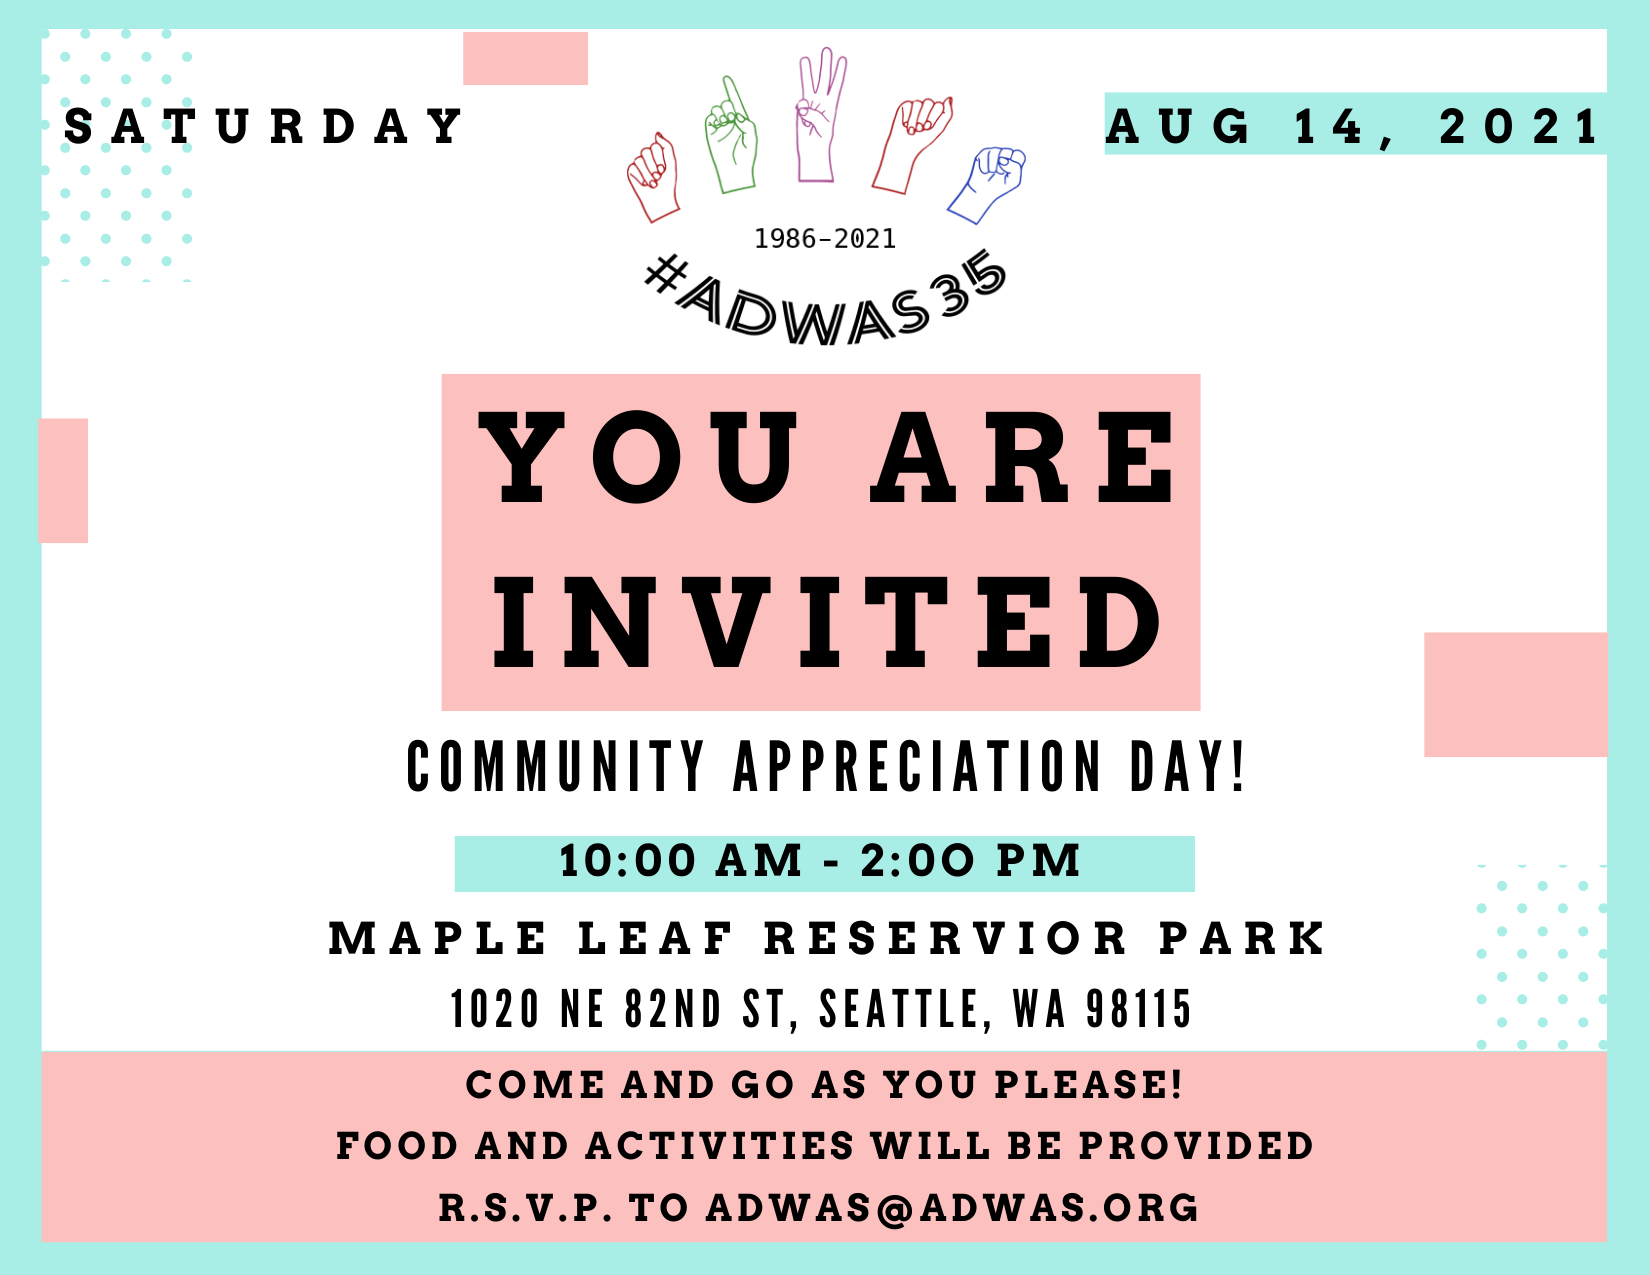 A blue and pink invitation to Community Appreciation Day. At the top "Saturday, Aug 14, 2021".In big bold letters "YOU ARE INVITED".  Underneath that "Community Appreciation Day! / 10:00am-2:00pm / Maple Leaf Reservoir Park / 1020 NE 82nd St, Seattle, WA 98115 / Come and go as you please! / Food and activities will be provided / R.S.V.P. to adwas@adwas.org